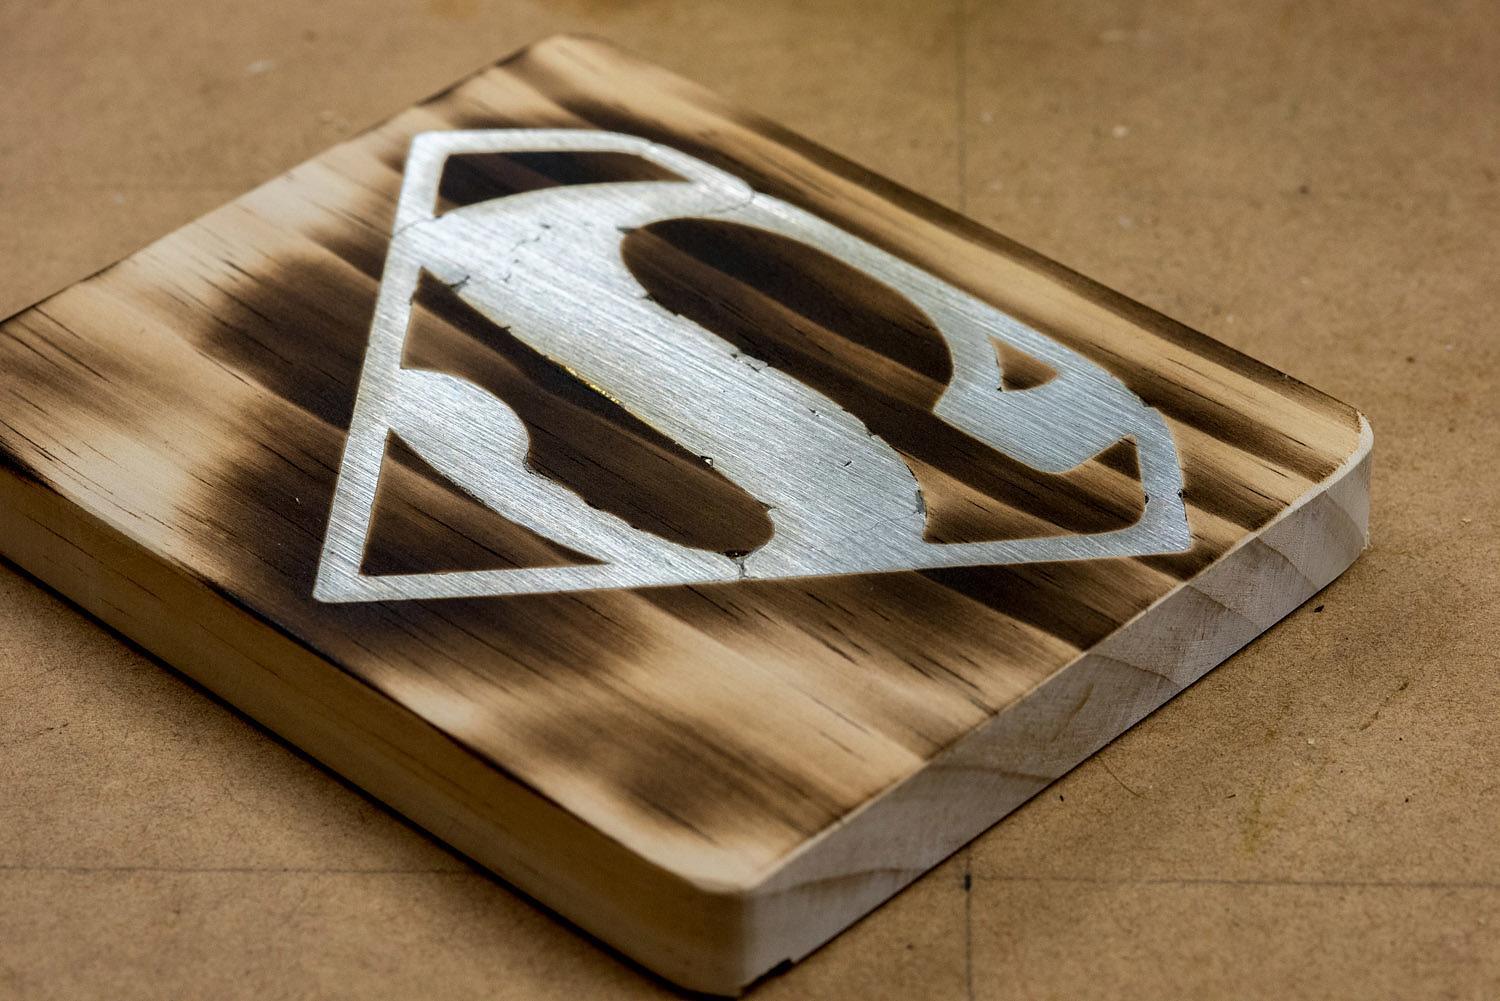 How to Create an Easy Inlay in Wood with Solder Make: